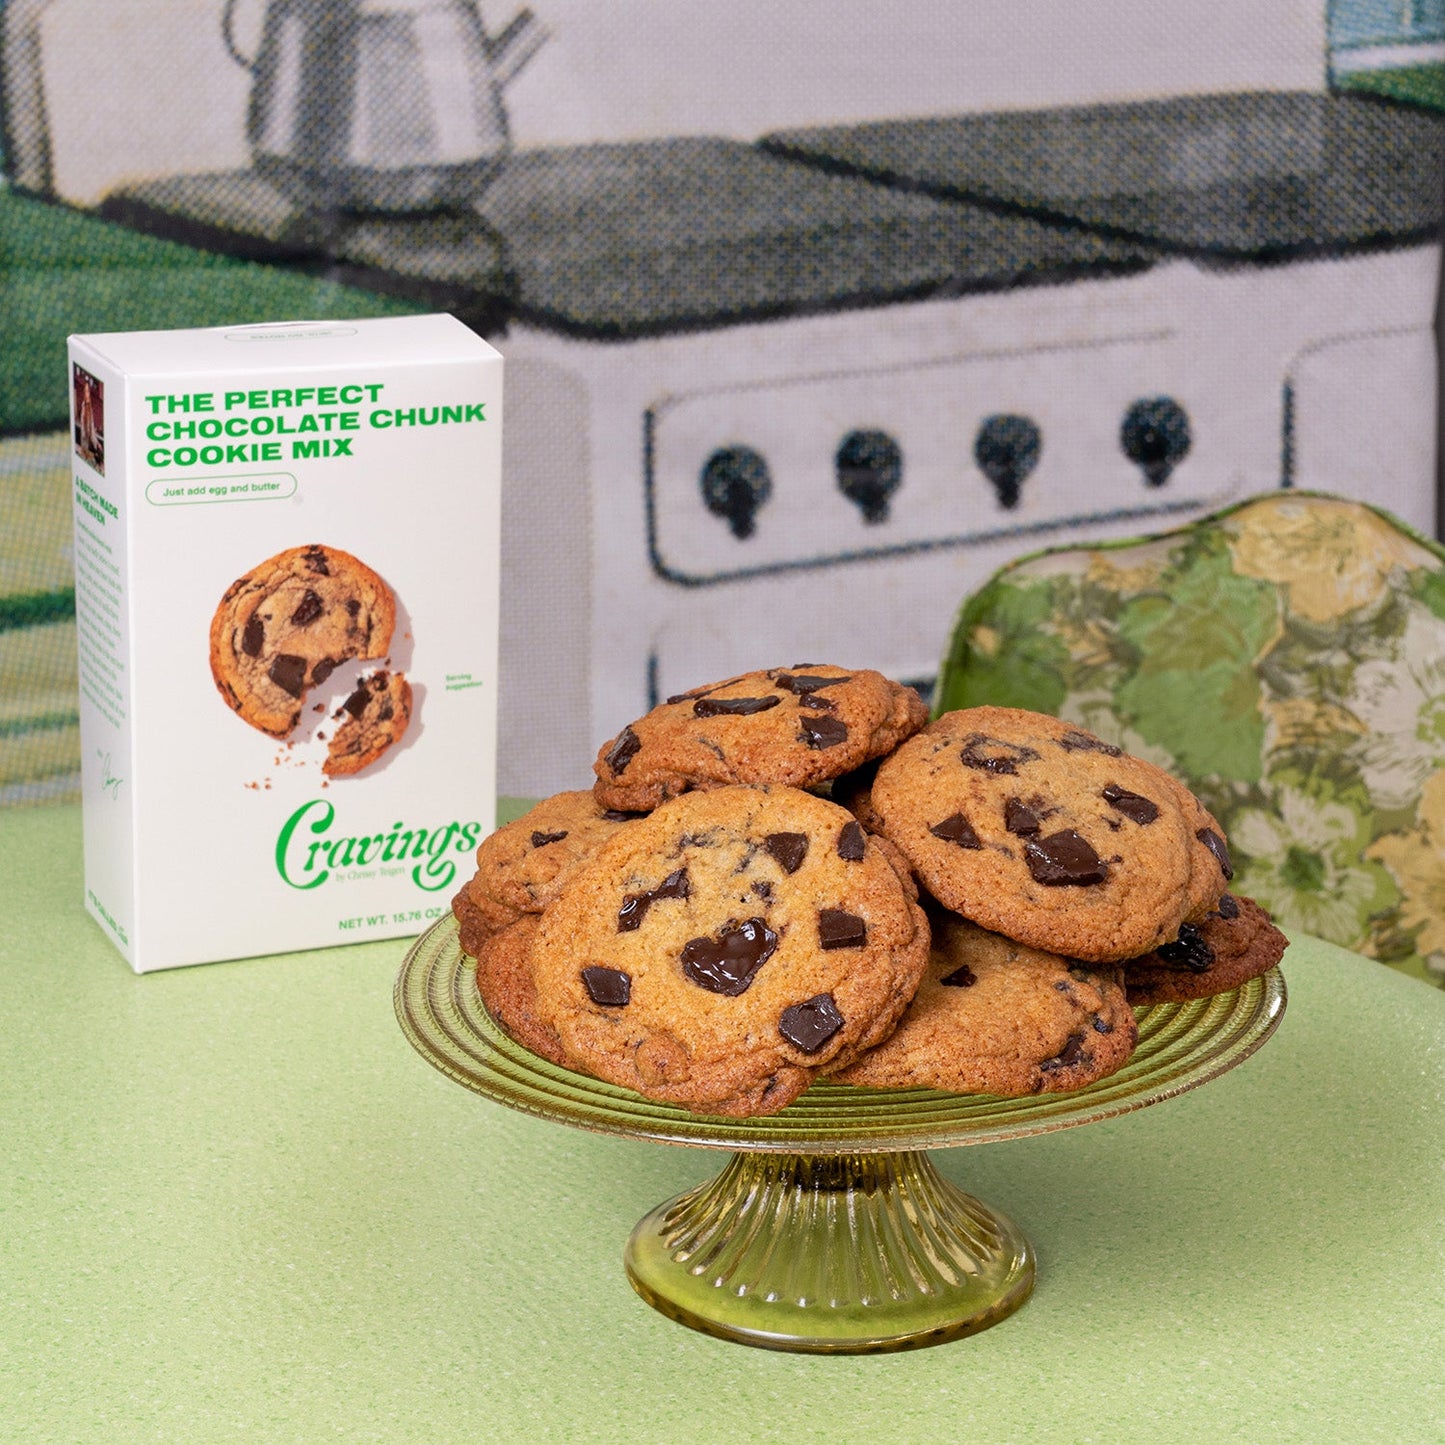 Cravings by Chrissy Teigen: The Perfect Chocolate Chunk Cookie Mix-3 Pack